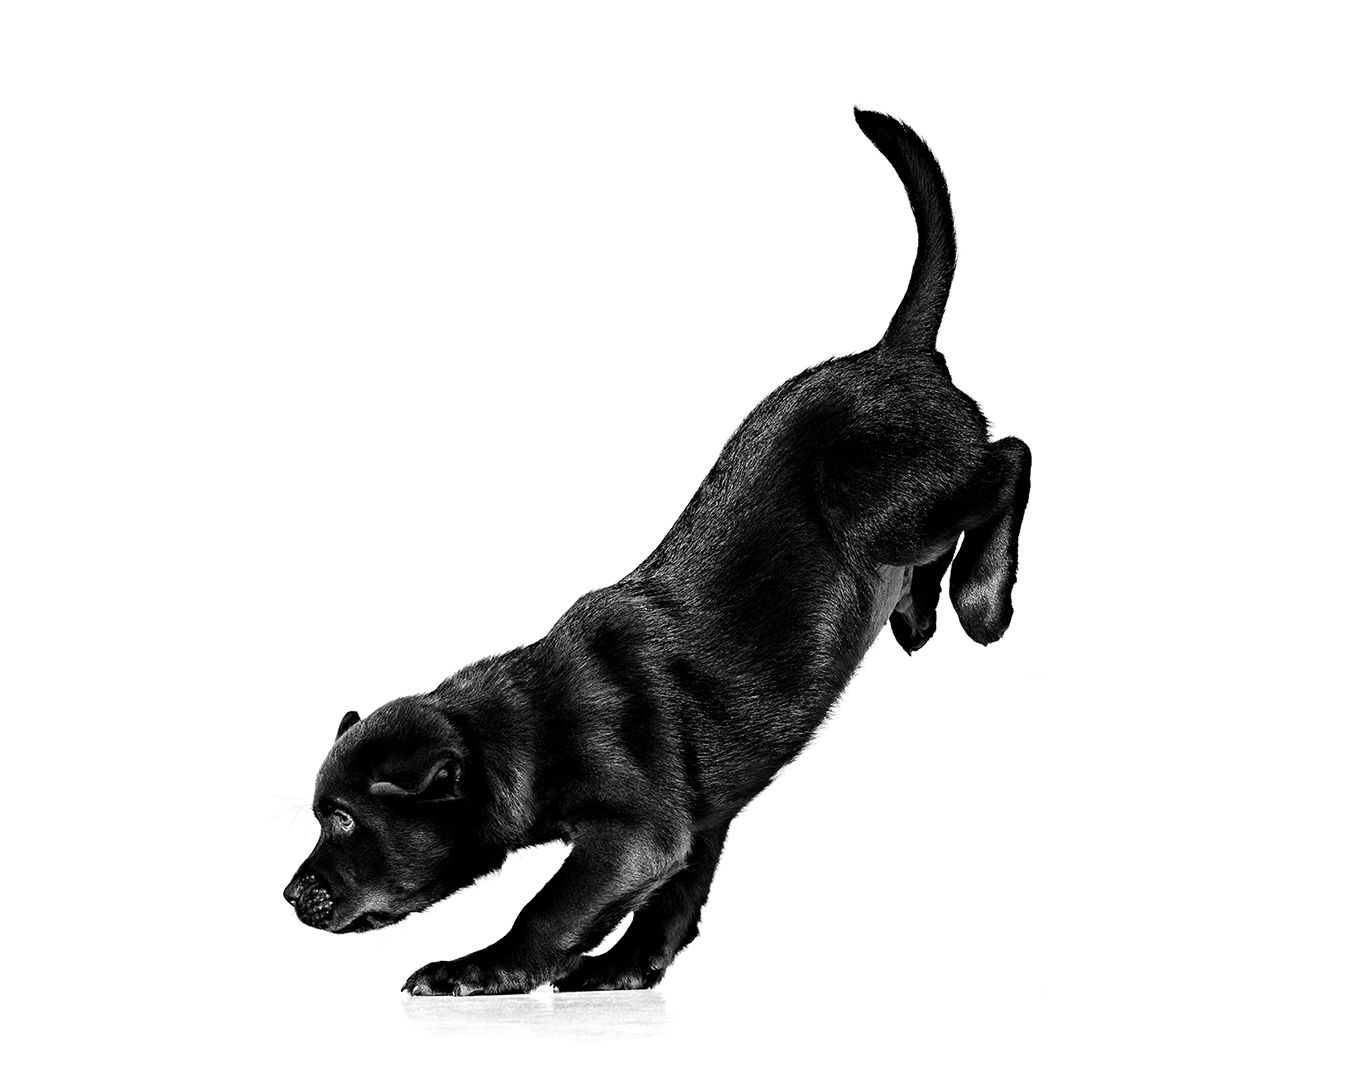 Black Labrador Retriever jumping in black and white on a white background